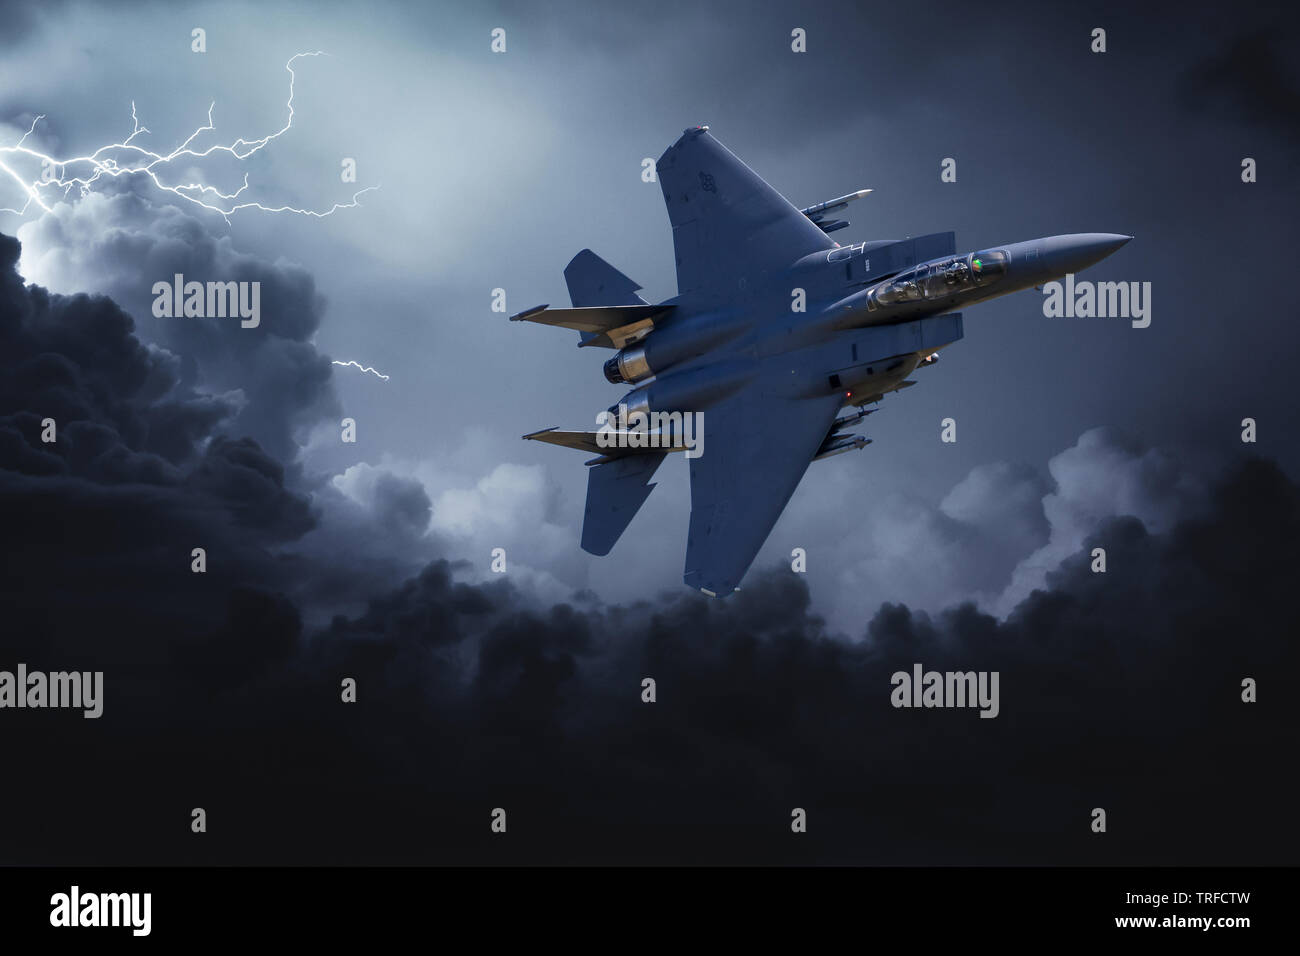 F-15 Strike Eagle. A composite image of a USAF F-15 flying through stormy skies. Stock Photo